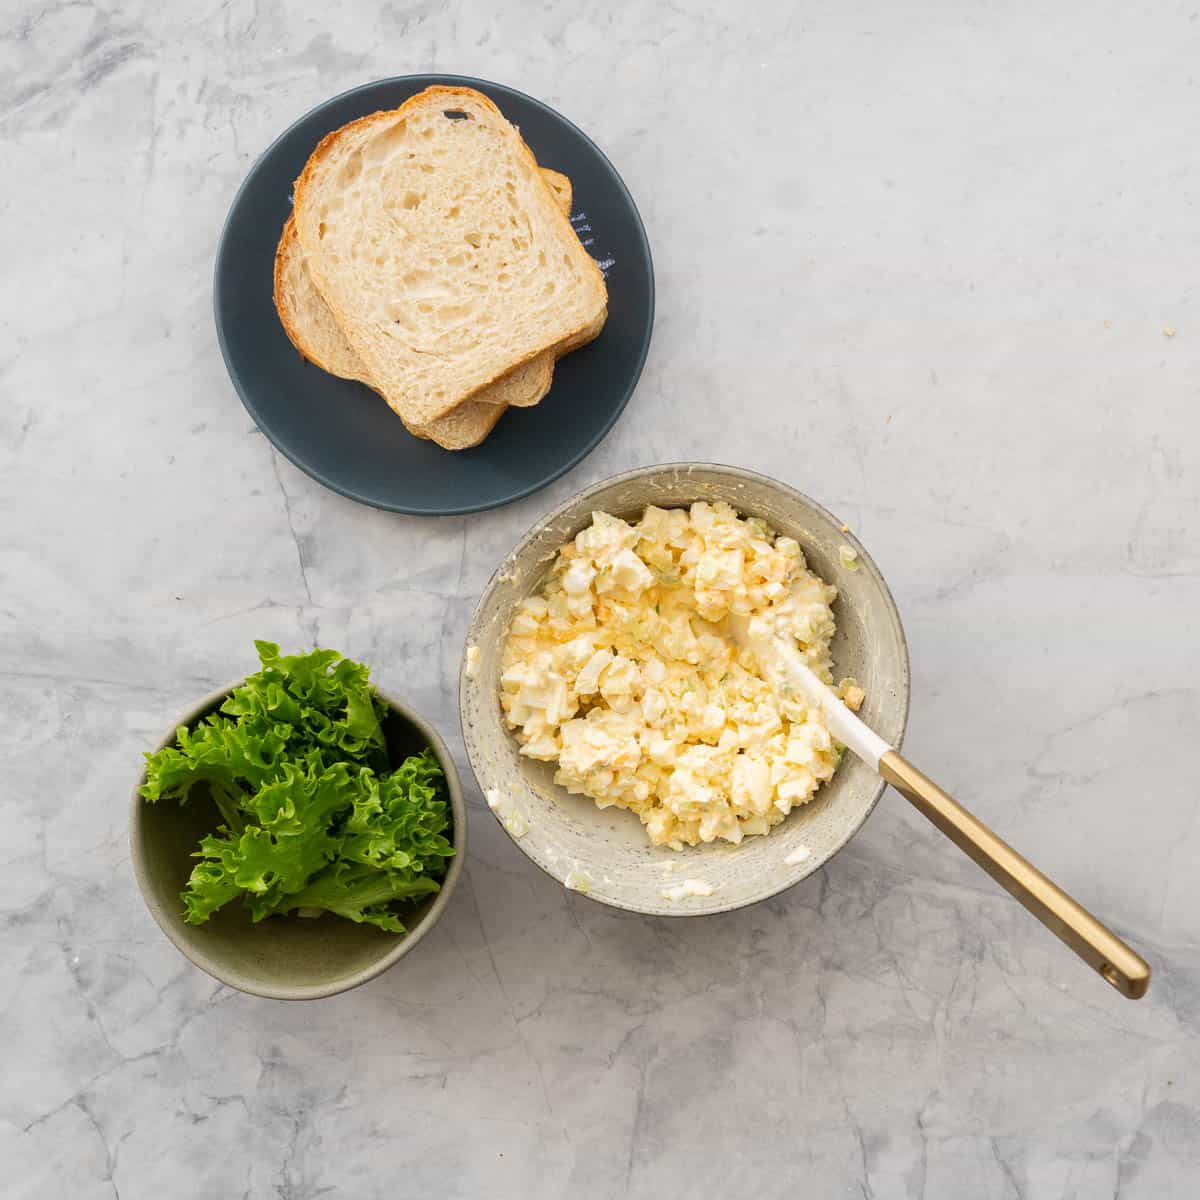 A bowl of egg salad next to a plate of four pieces of bread and a bowl of frilly lettuce leaves. 